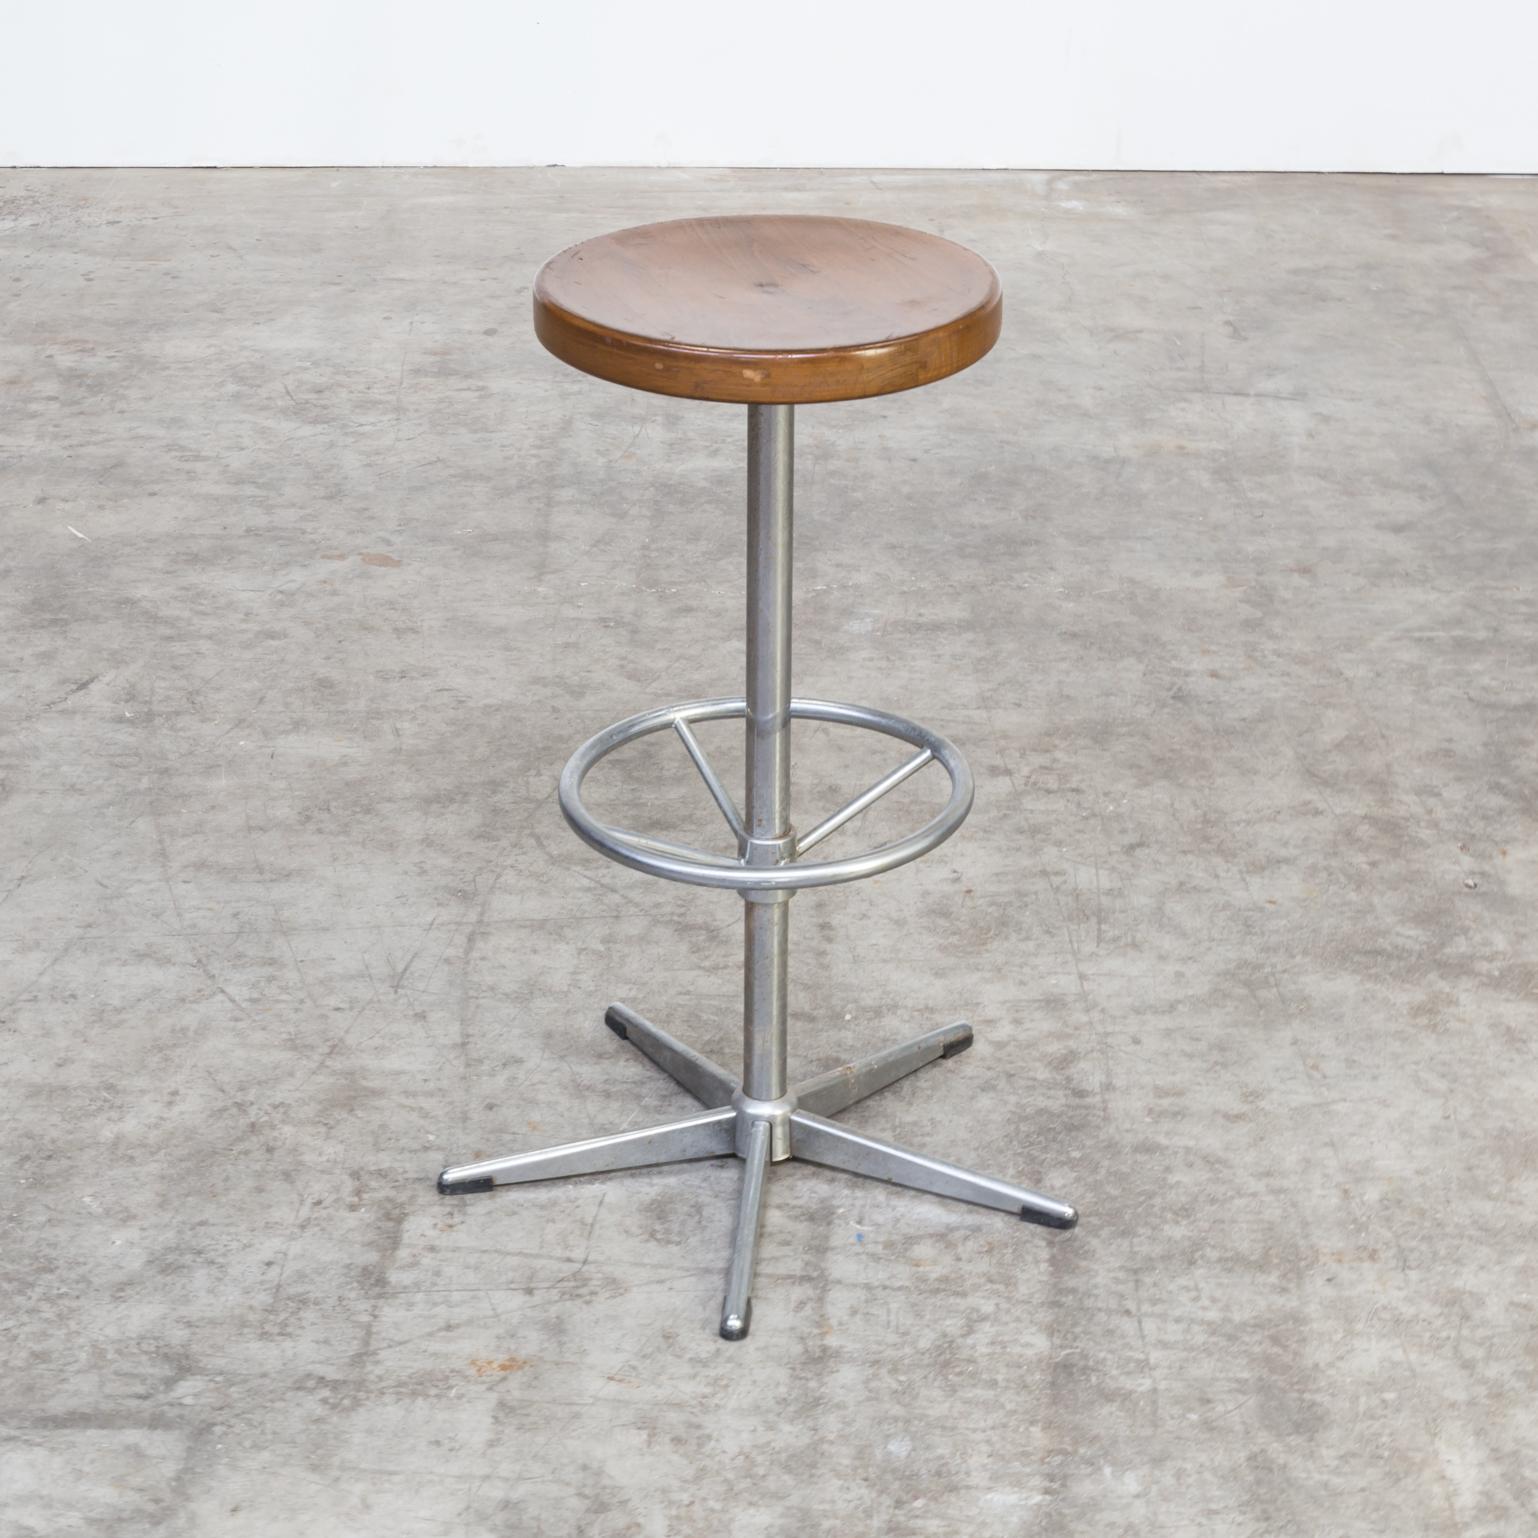 Midcentury Chrome Framed Stools with Wooden Seat Set of Six In Good Condition For Sale In Amstelveen, Noord